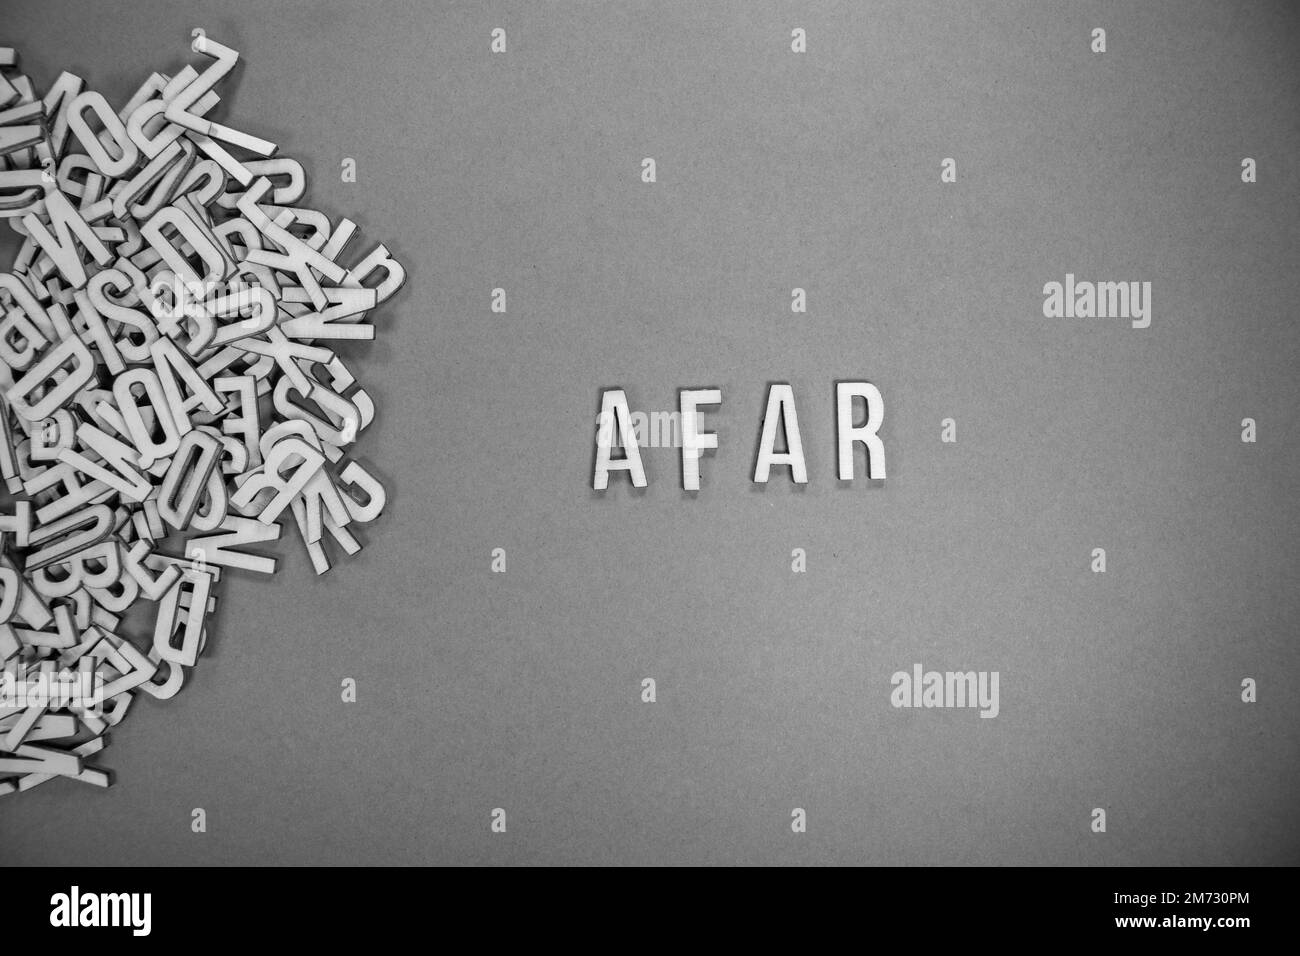 AFAR in wooden English language capital letters spilling from a pile of letters on a blue background - black and white Stock Photo